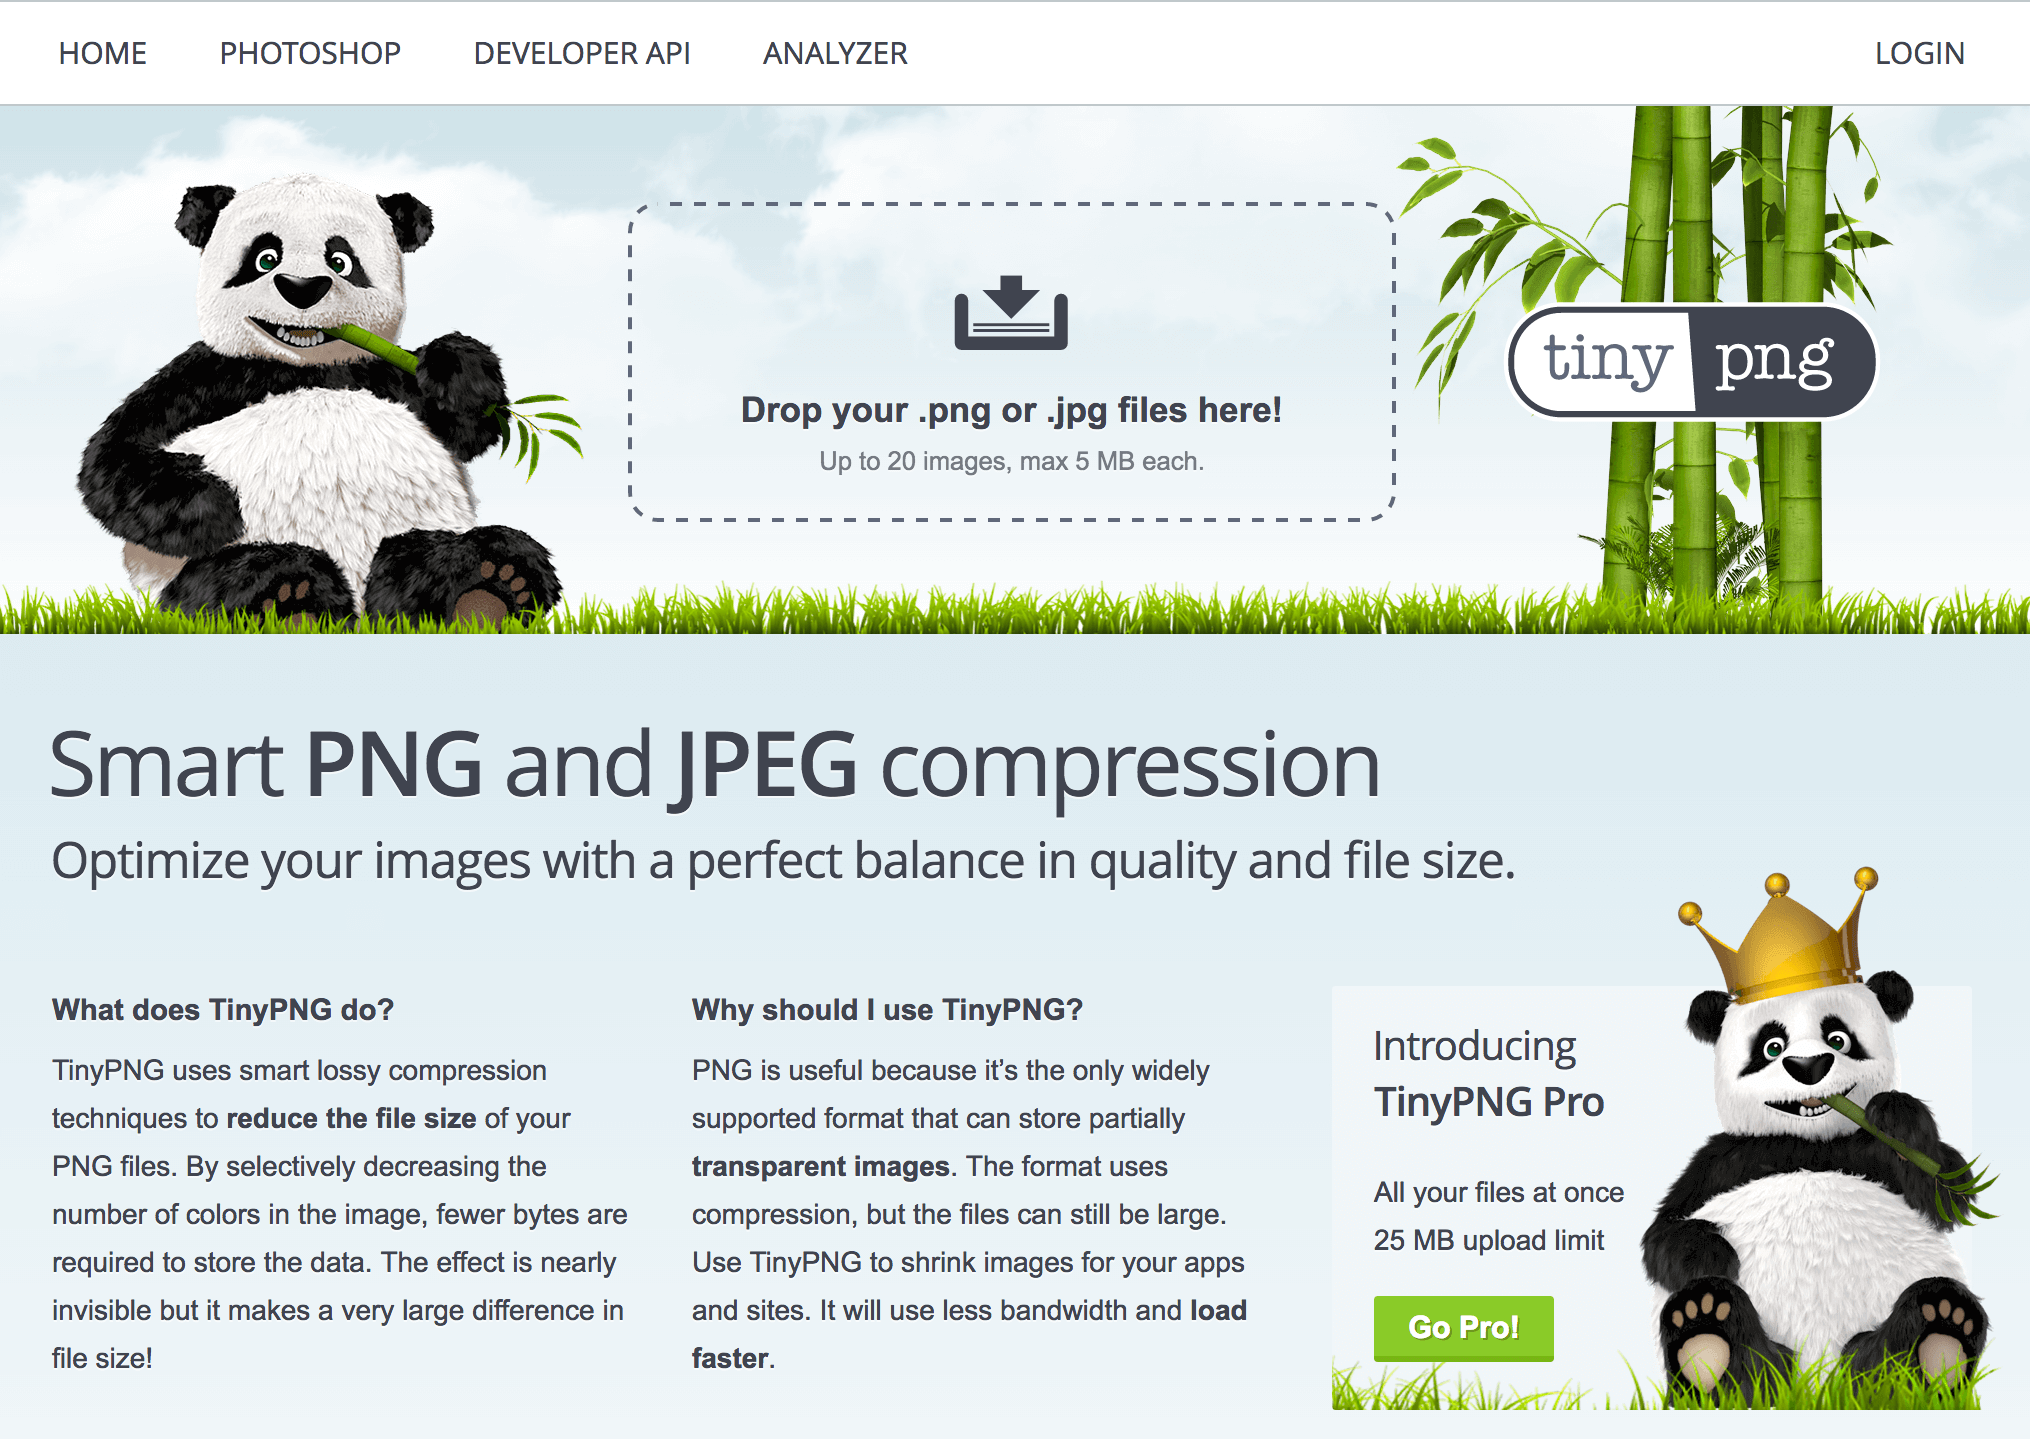 The TinyPNG home page.